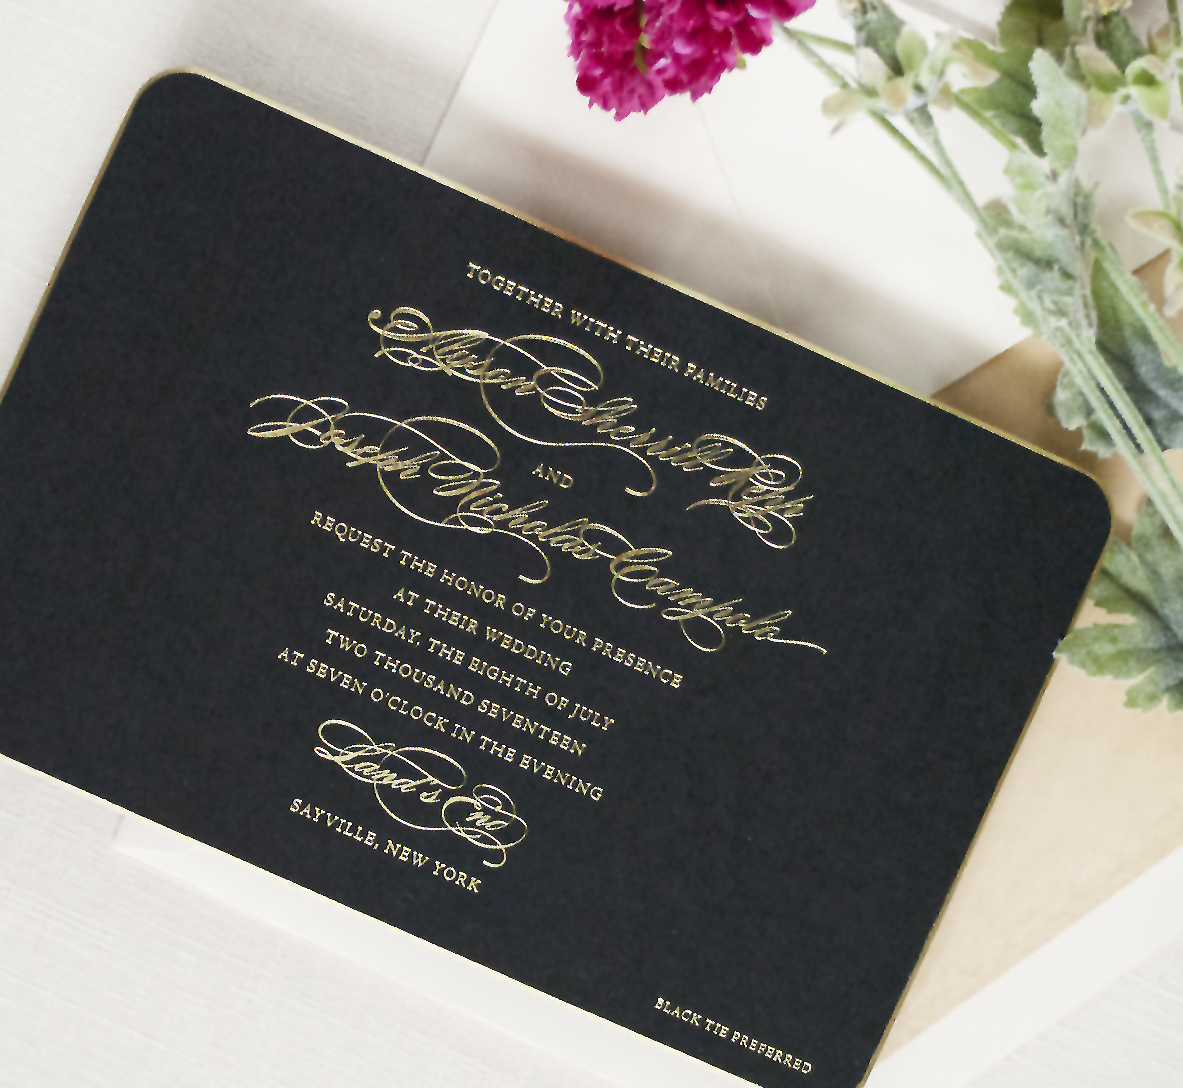 Formal Black and Gold Wedding Invitation, Foil text on black paper, gold gilded edge